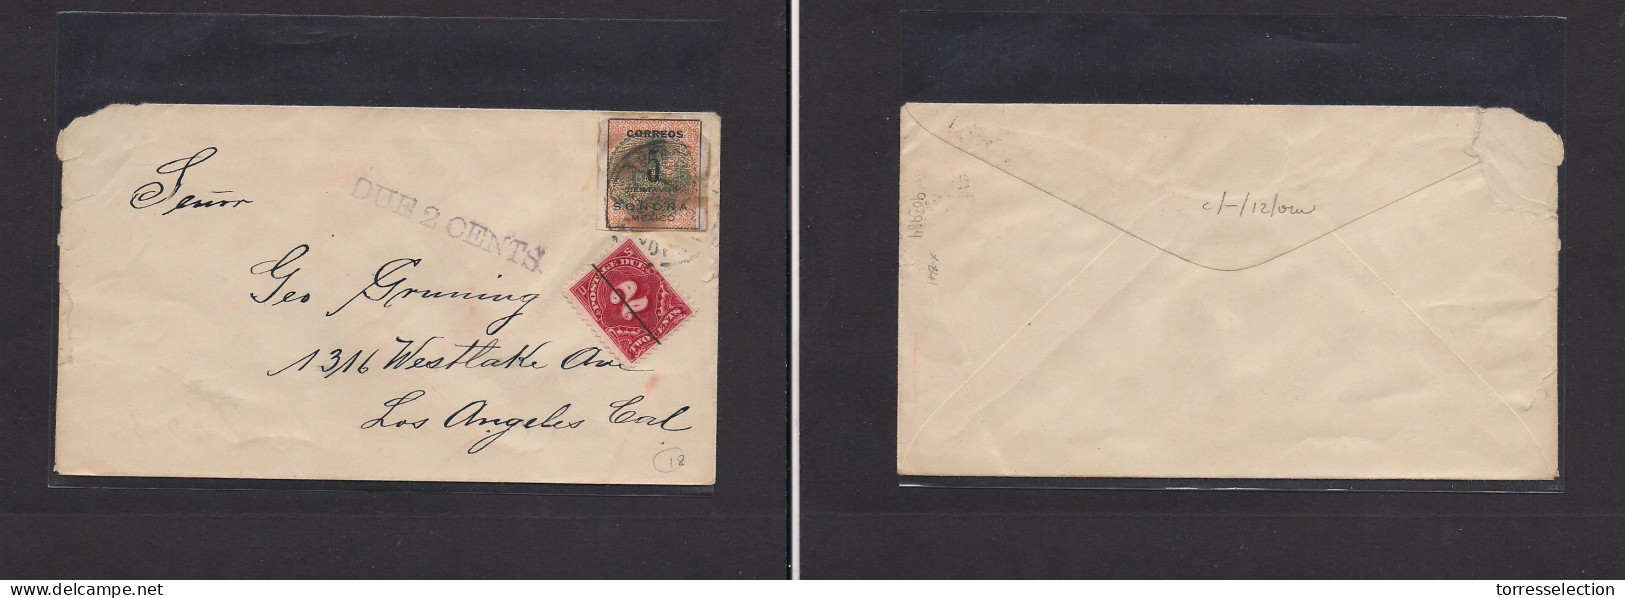 MEXICO. Mexico - Cover - C,1914 Sonora Color Seal To USA LA Fkd Taxed US P Dues Env. Easy Deal. XSALE. - Mexico